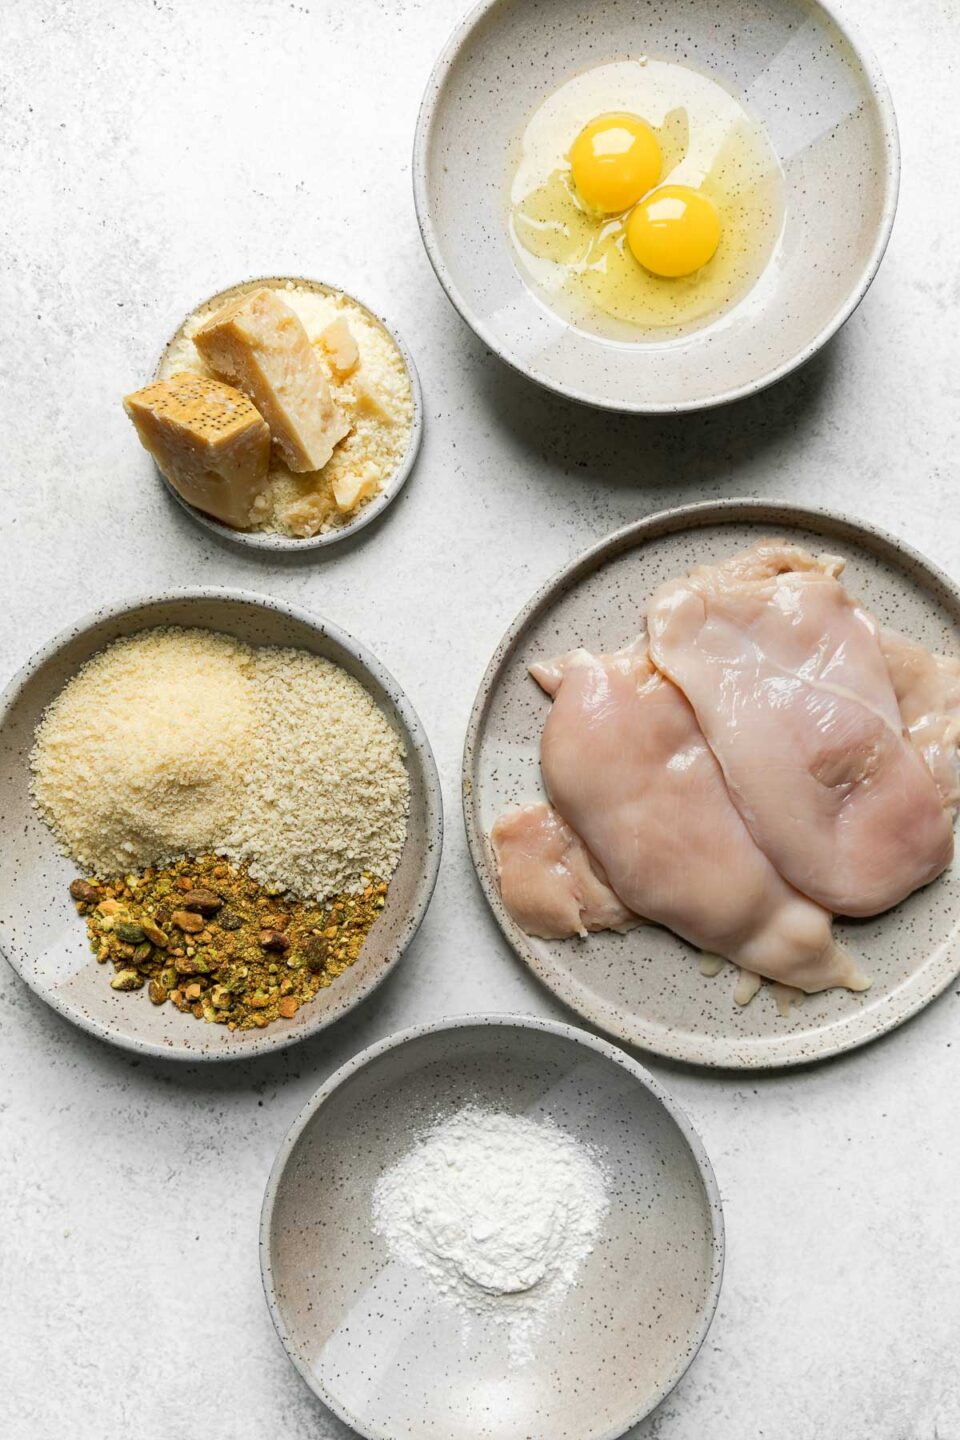 Parmesan pistachio crusted chicken ingredients are arranged in speckled gray ceramic bowls and plates a top a creamy white texutred surface: boneless, skinless chicken breasts, all-purpose flour, eggs, pistachios, panko breadcrumbs, and Parmigiano Reggiano.